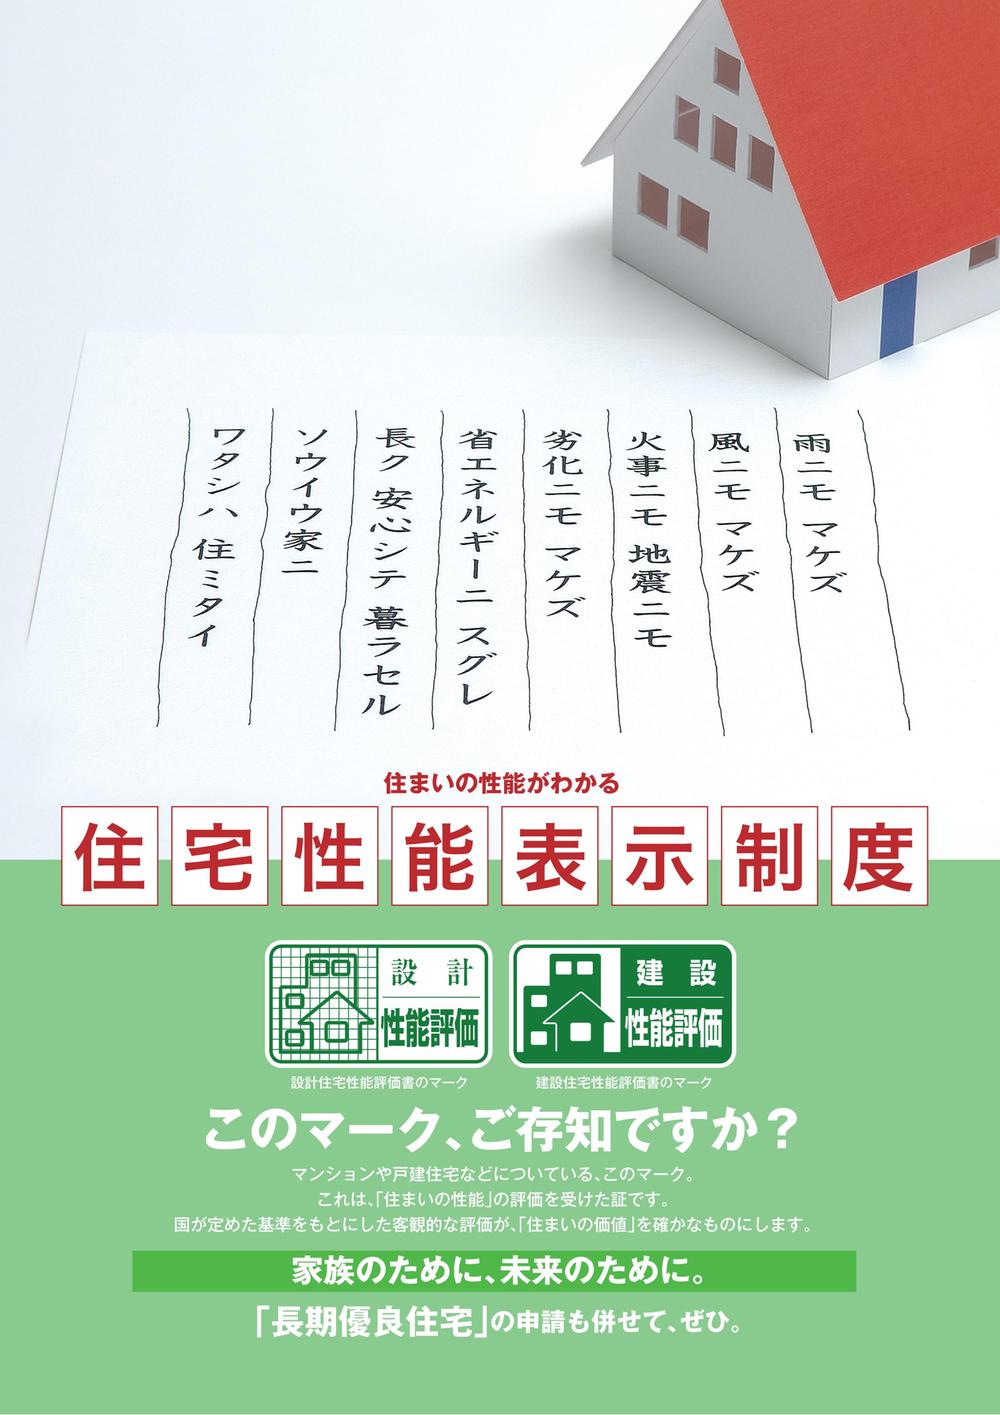 Construction ・ Construction method ・ specification. Our company has acquired the entire building housing performance evaluation! ! 